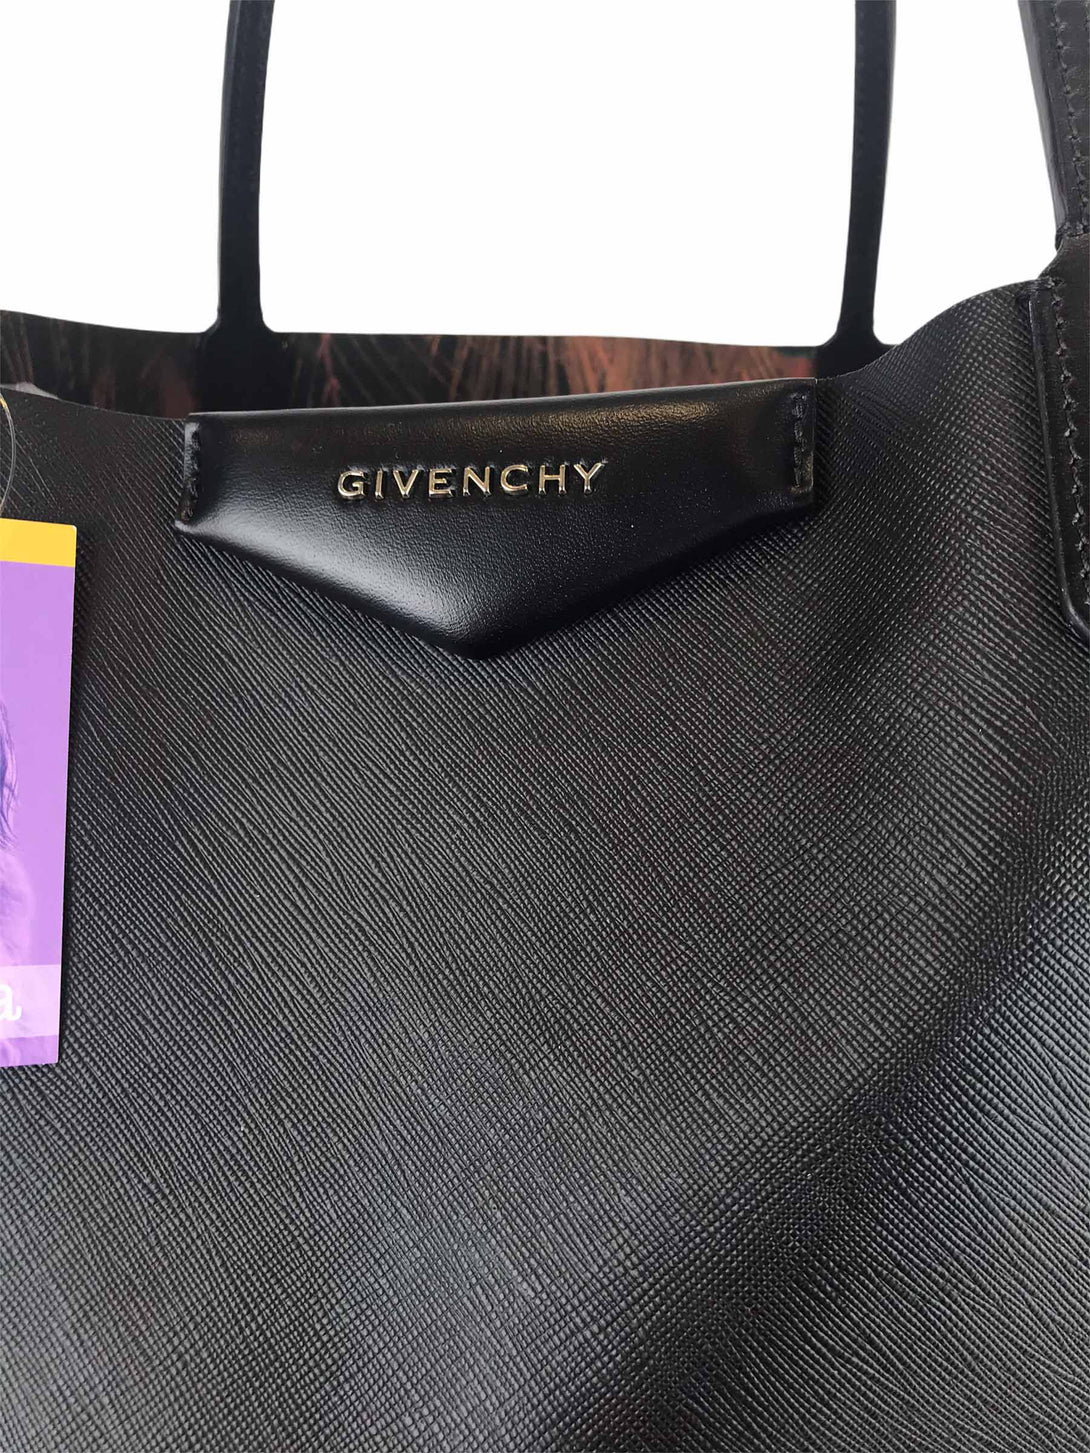 Givenchy Black Leather Tote - Siopaella Designer Exchange